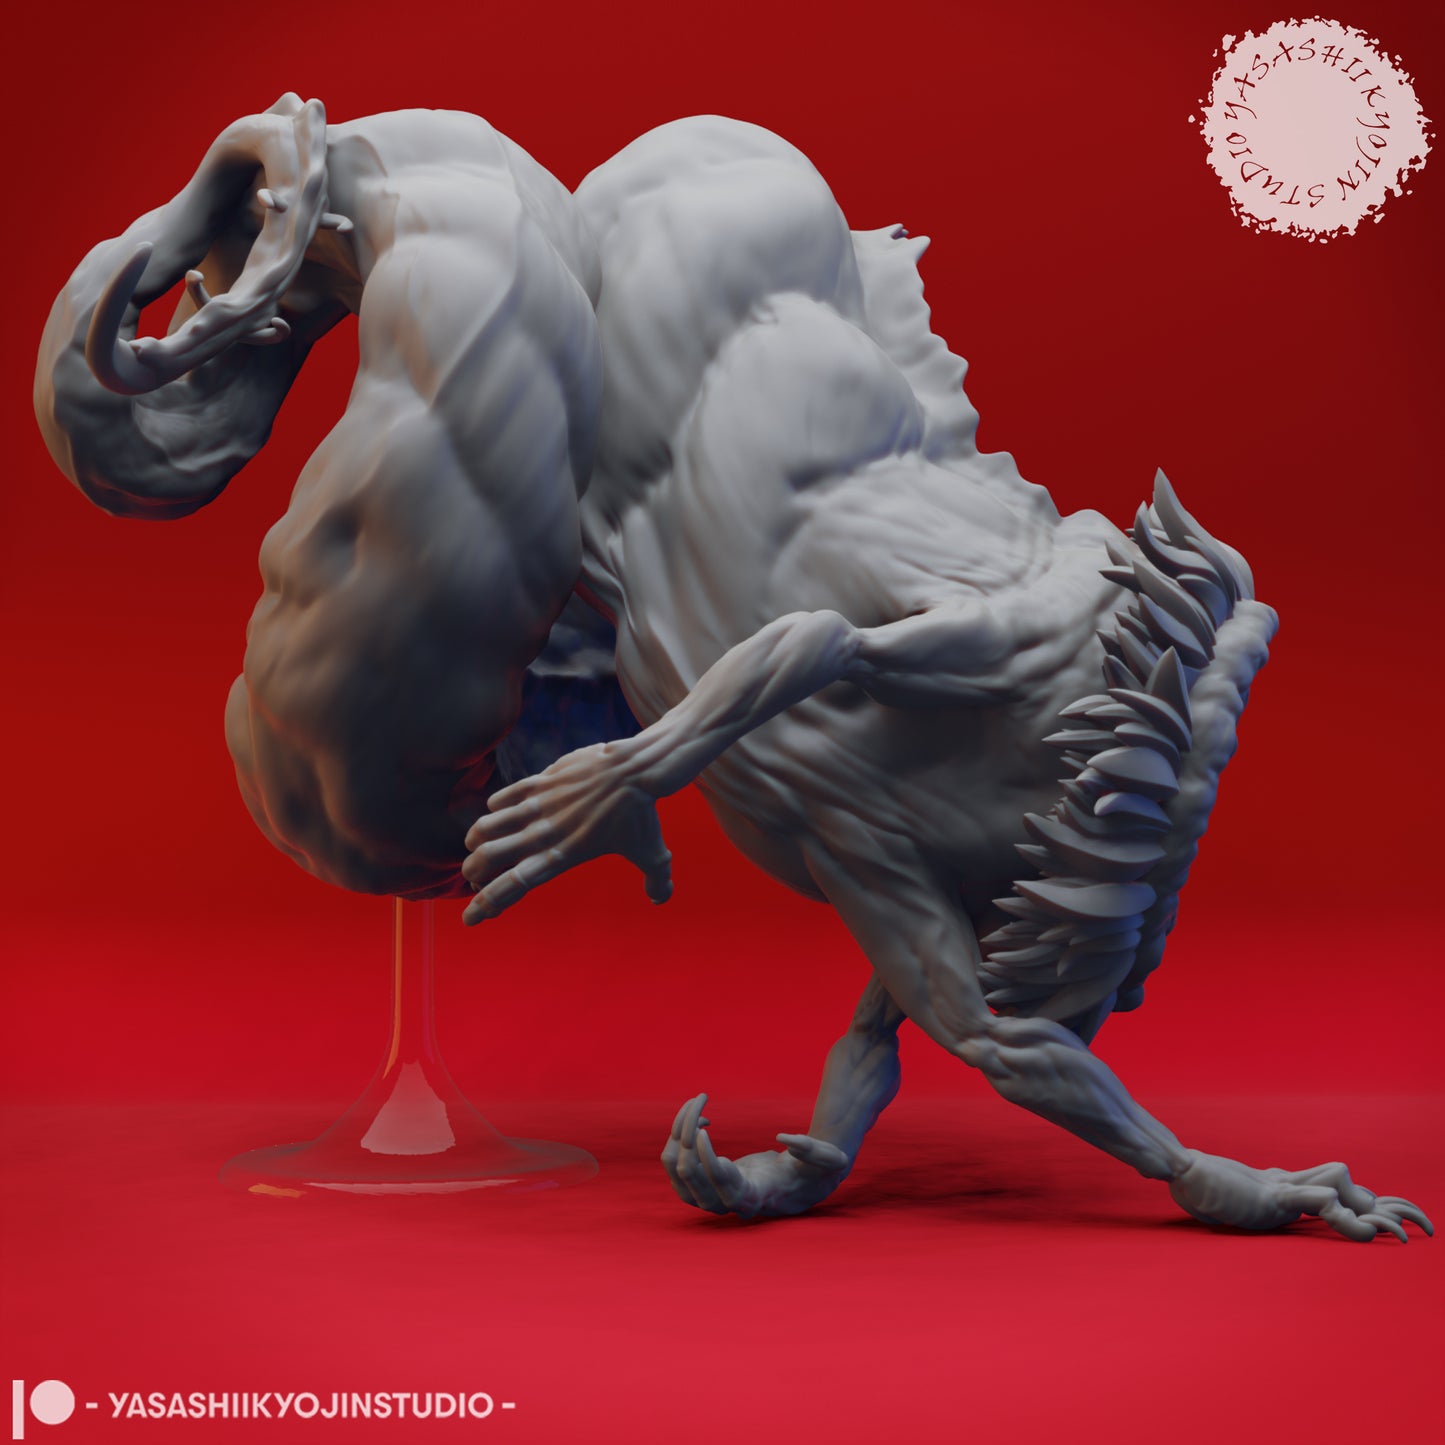 Demonic Windsock - Tabletop Miniature (Pre-Supported STL)